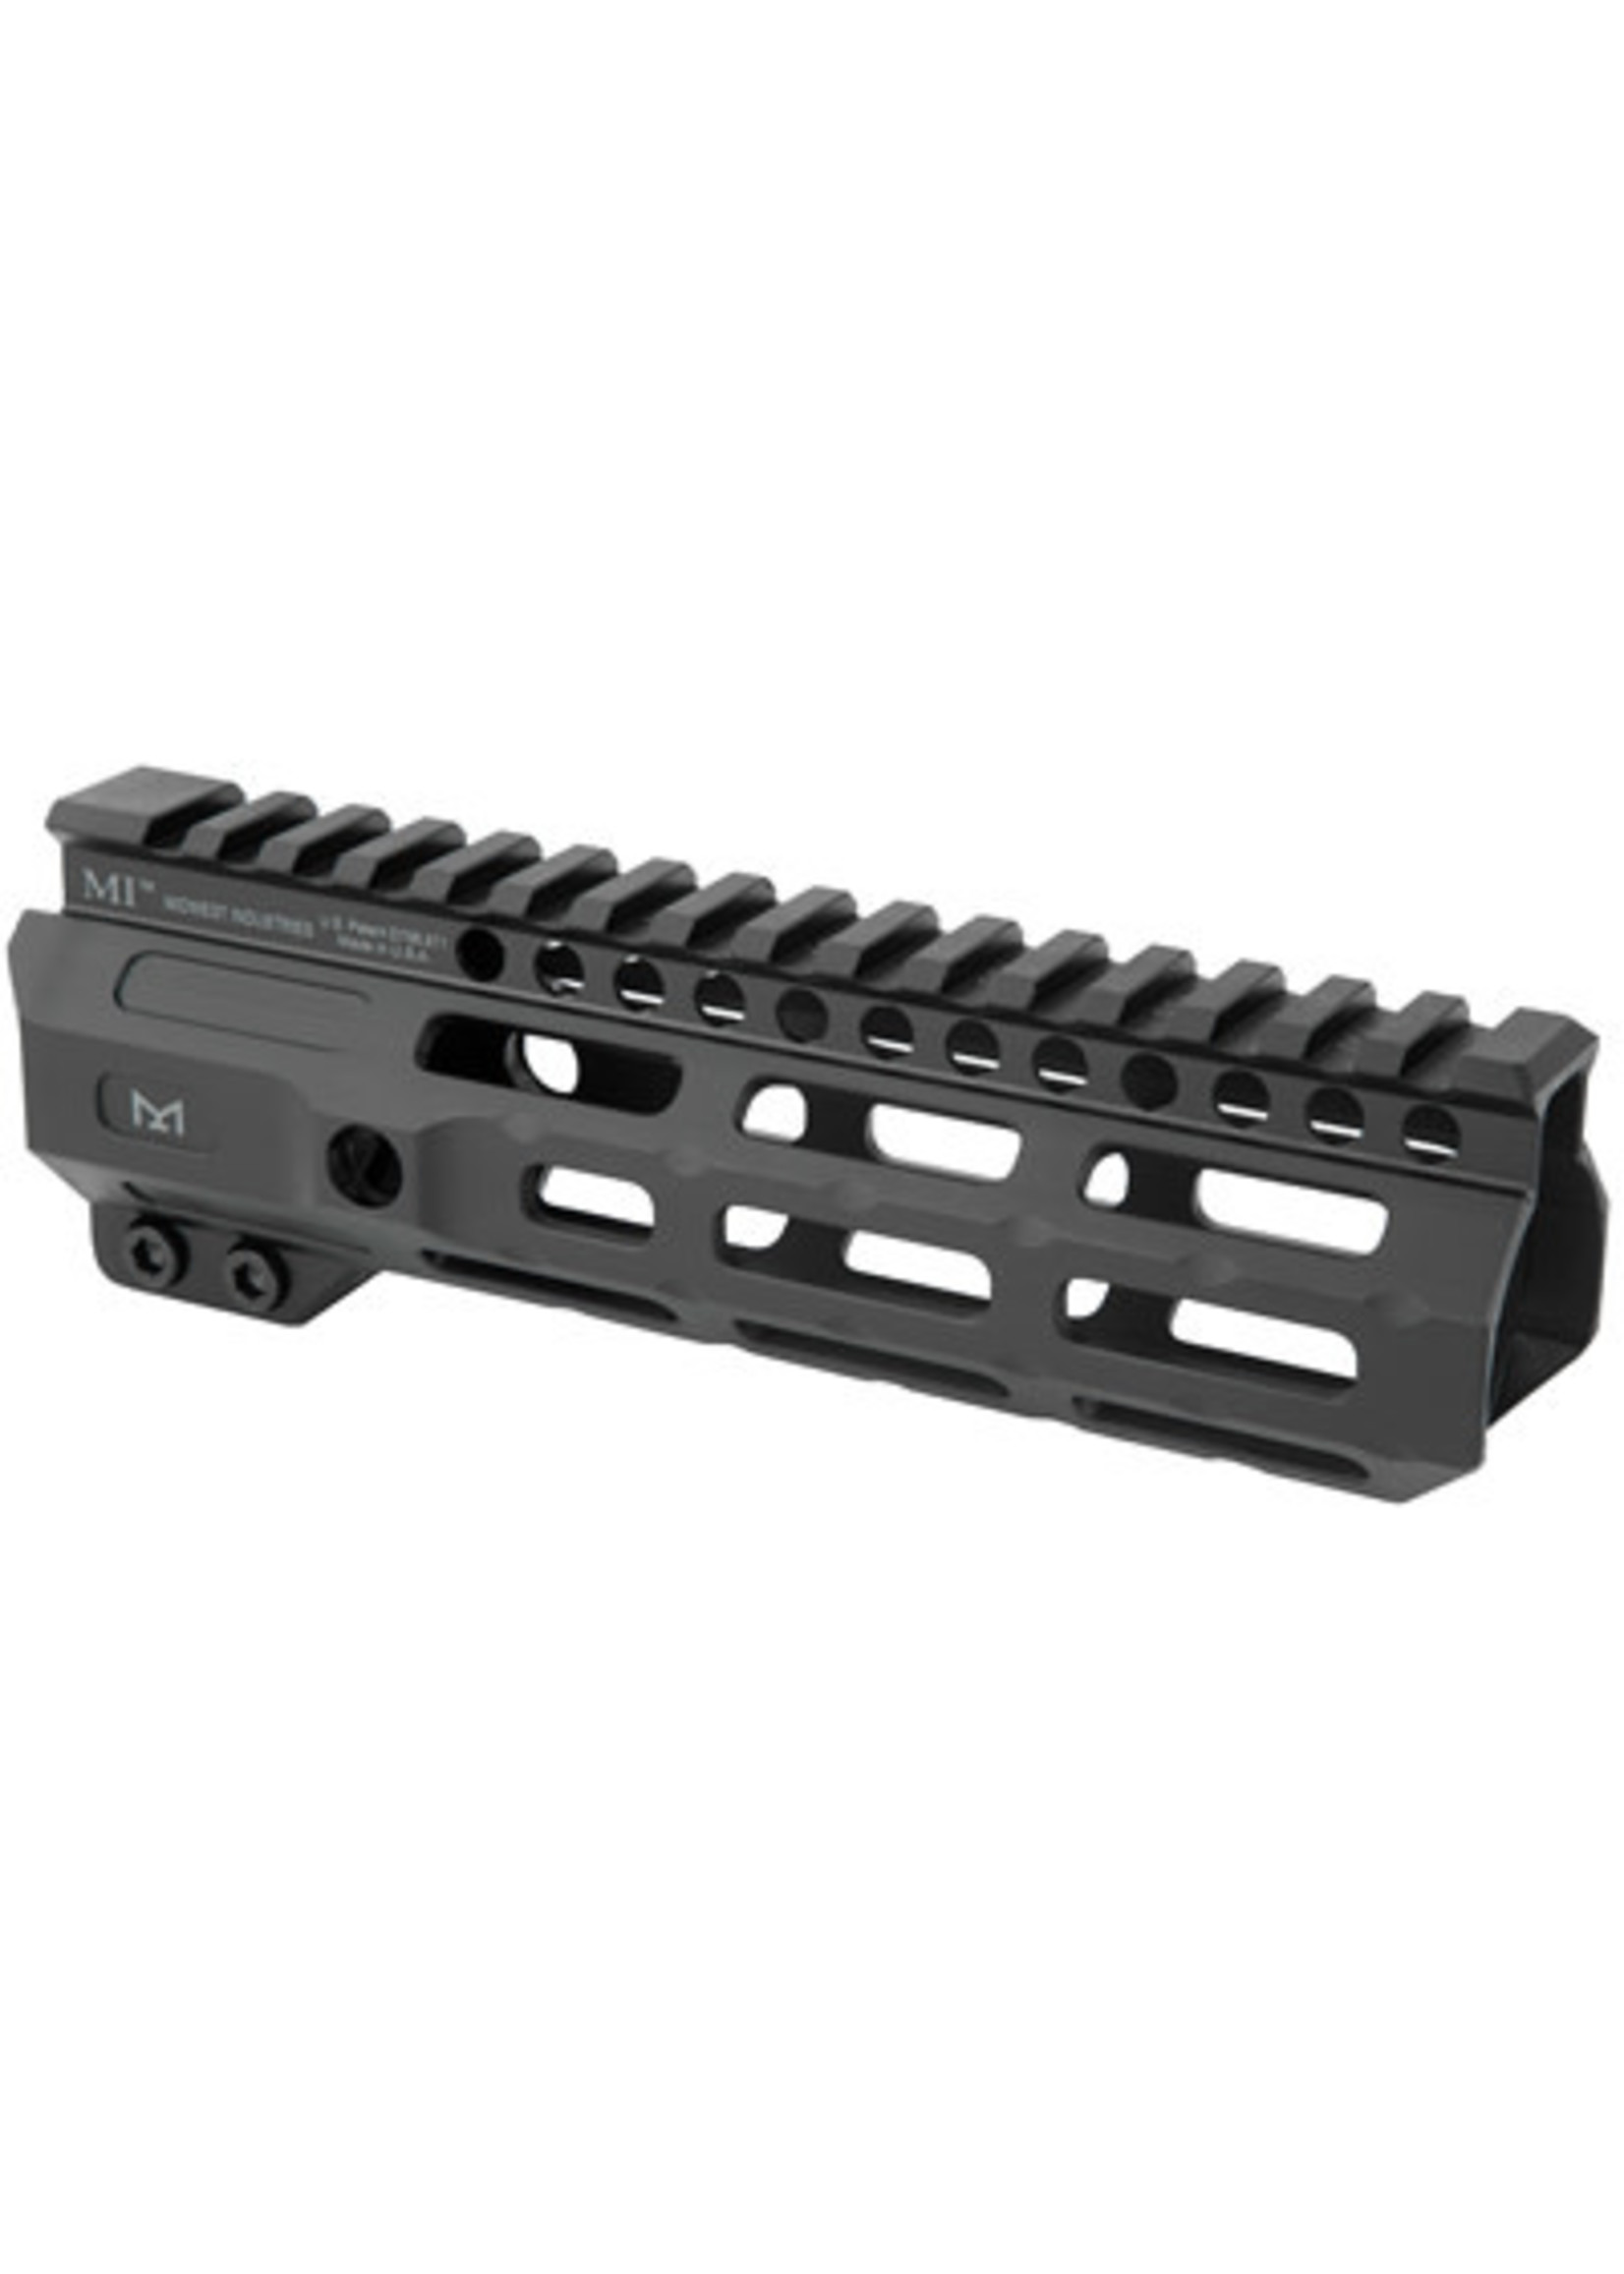 Midwest Industries Midwest Industries, Combat Rail M-LOK, Handguard, Fits AR-15 Rifles, 7" Wrench Included, Black